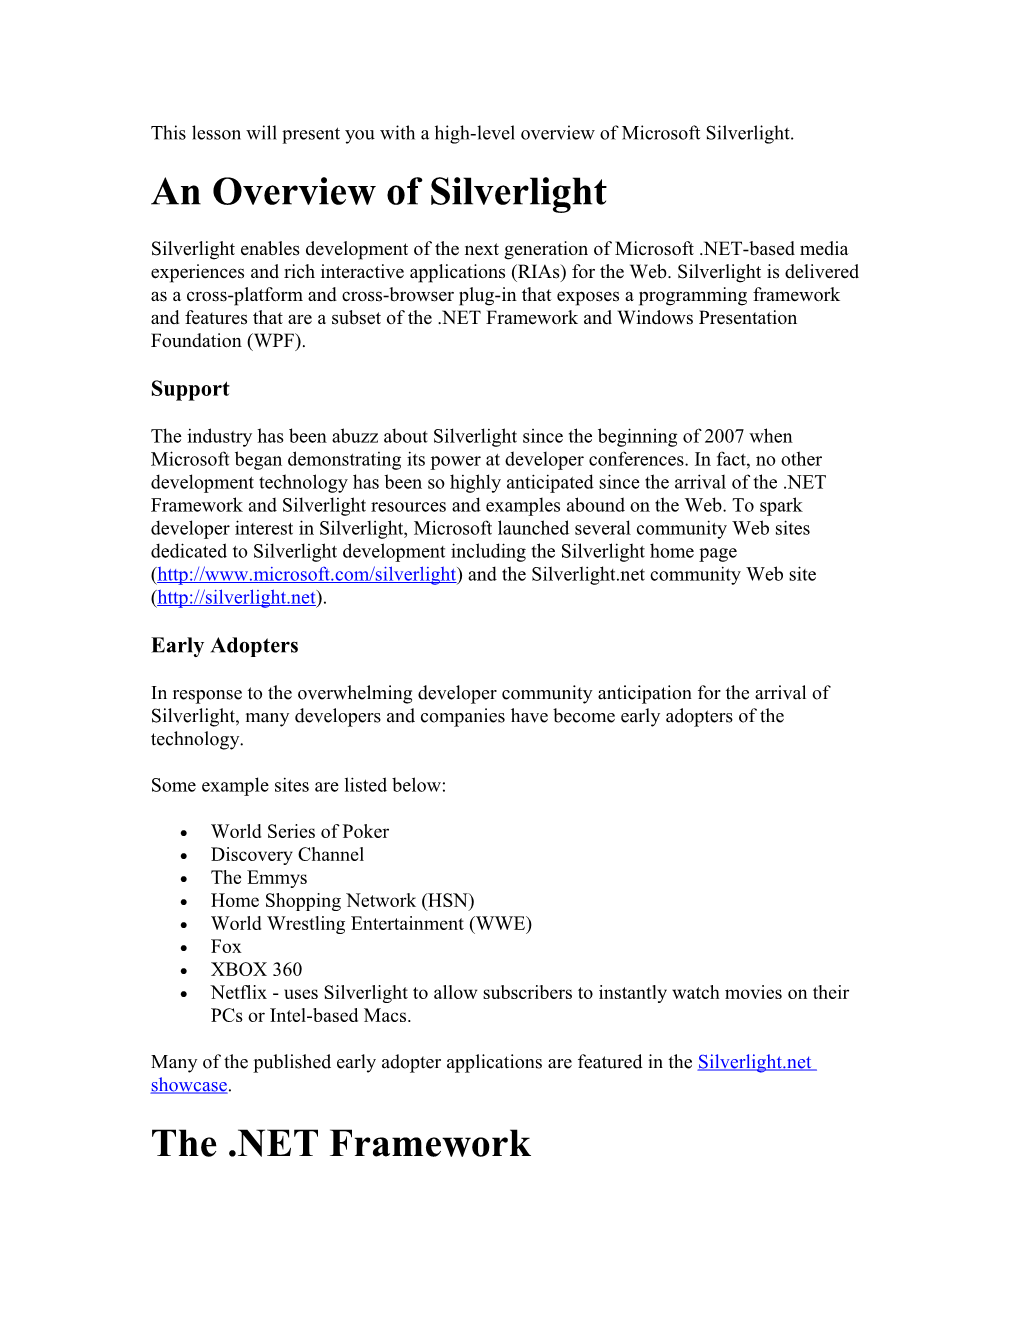 This Lesson Will Present You with a High-Level Overview of Microsoft Silverlight